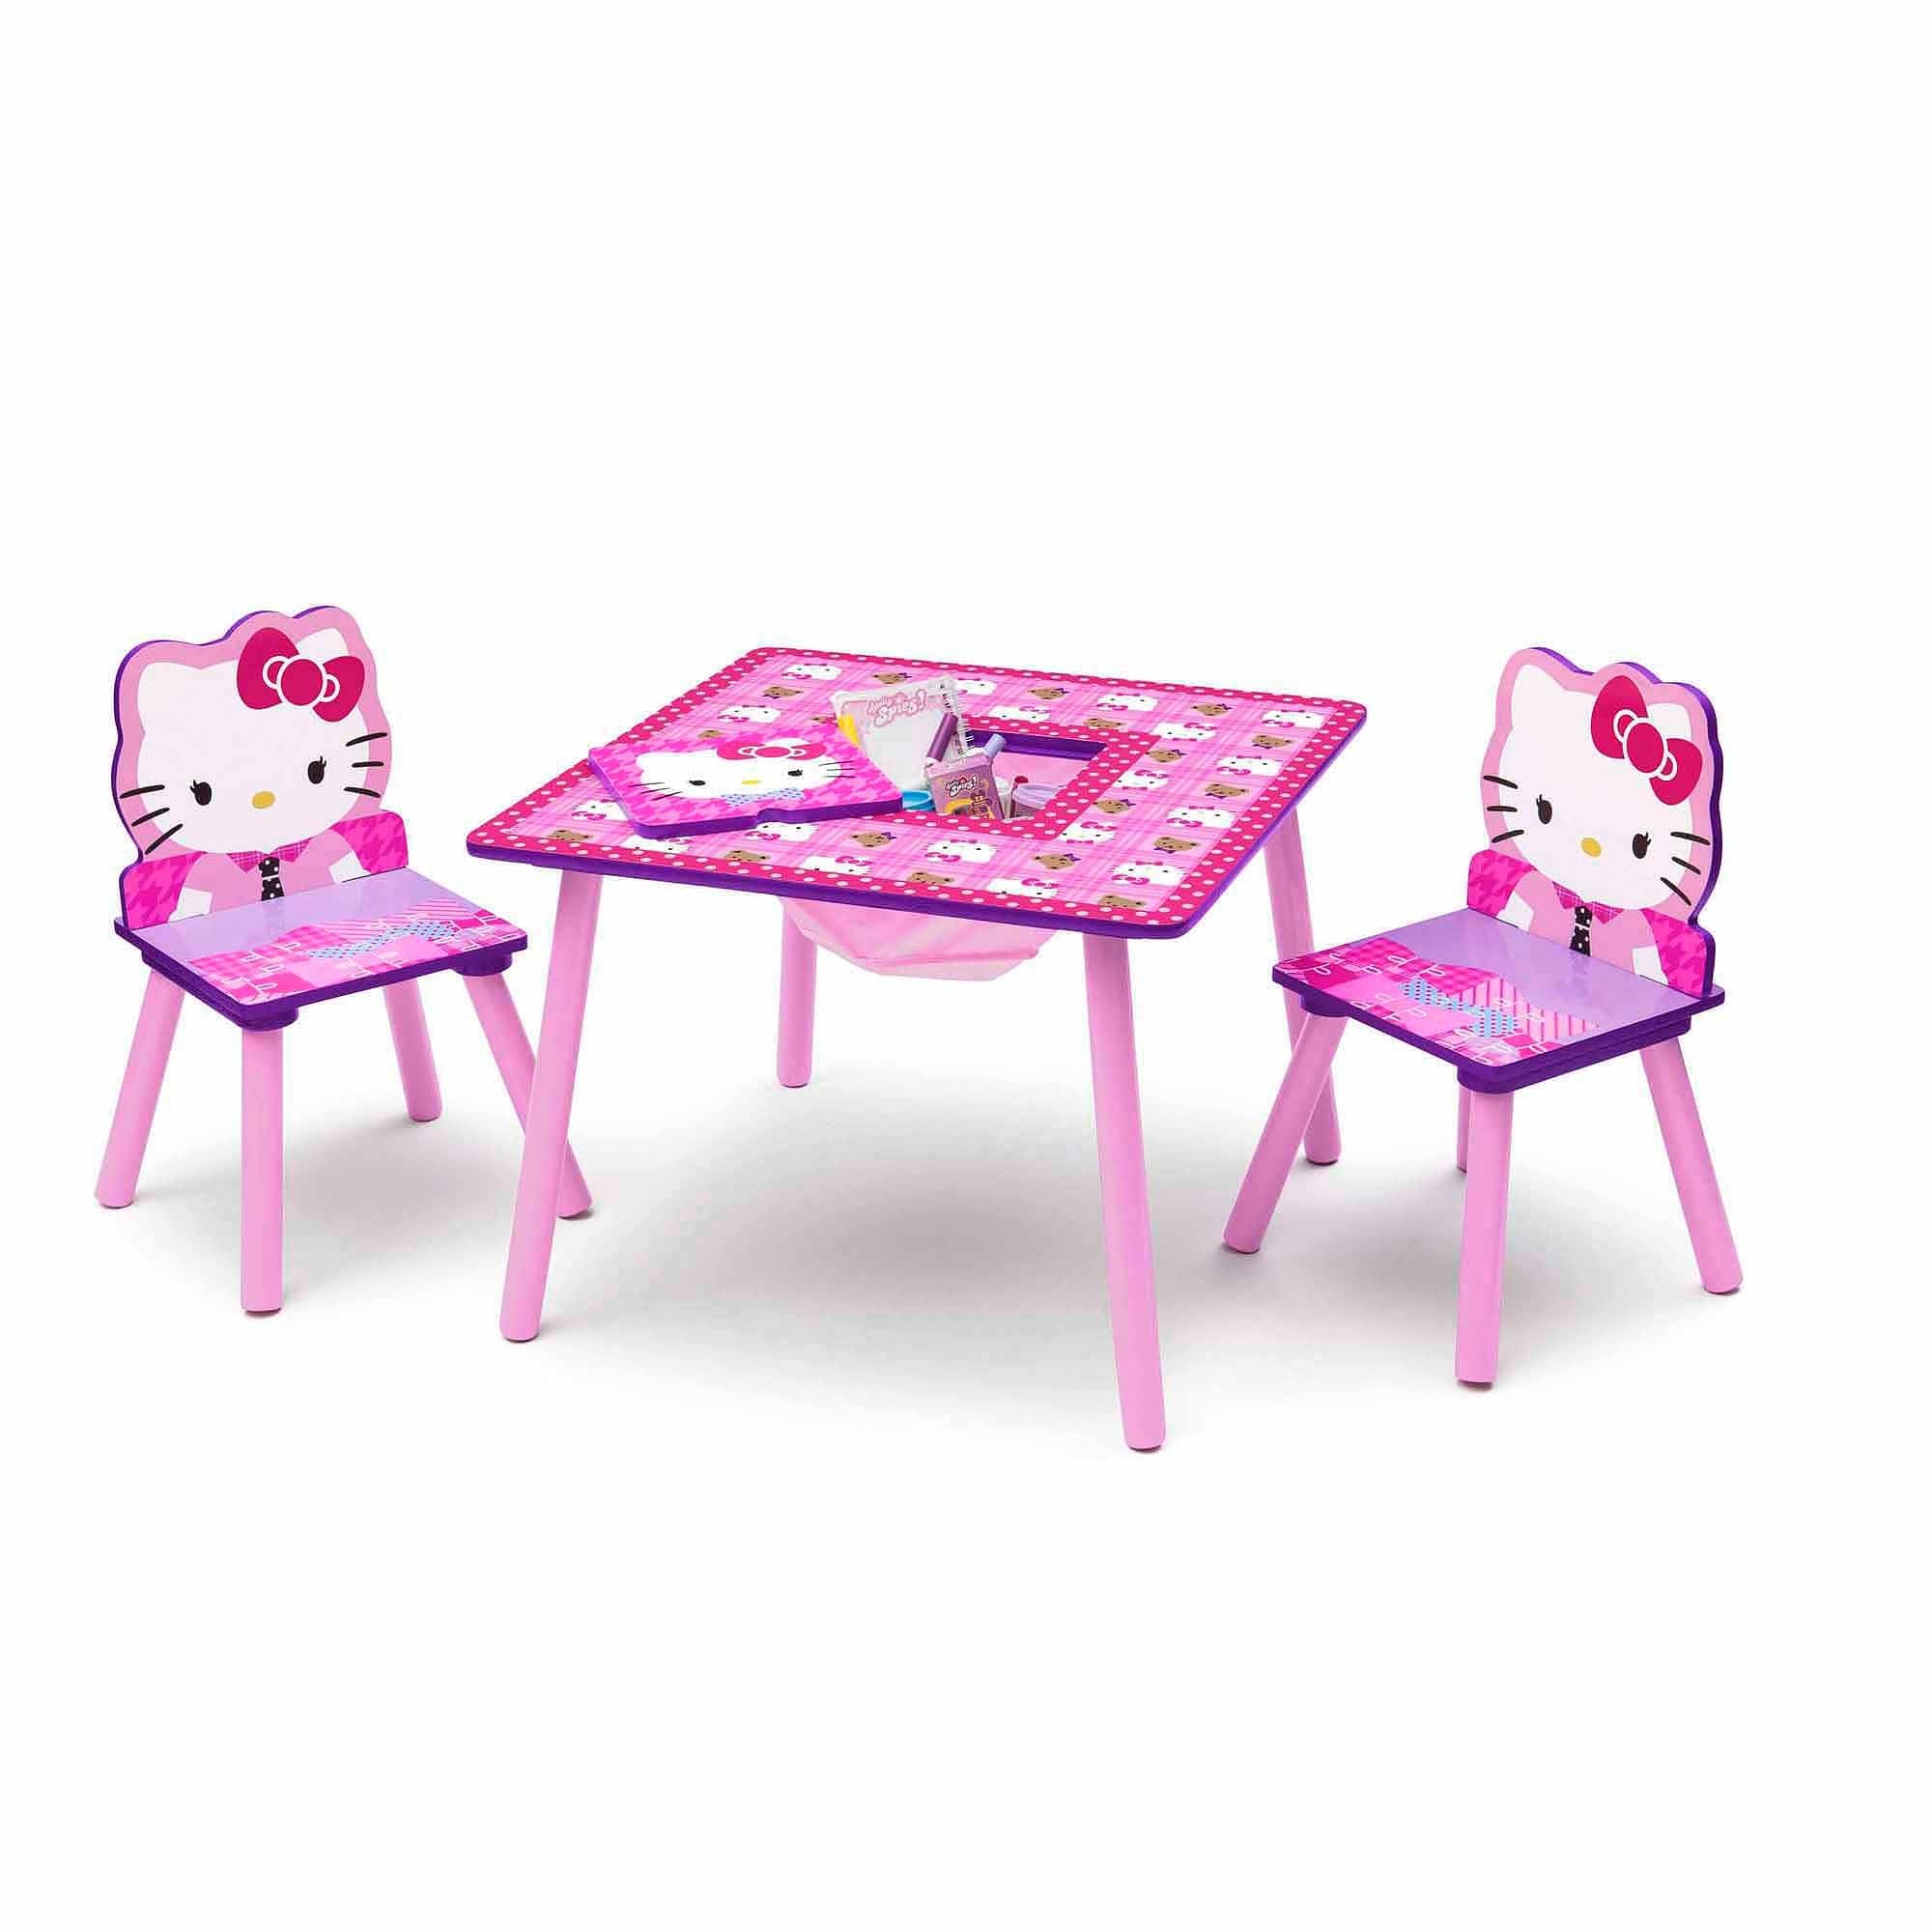 Hello kitty toddler table and chair set with storage